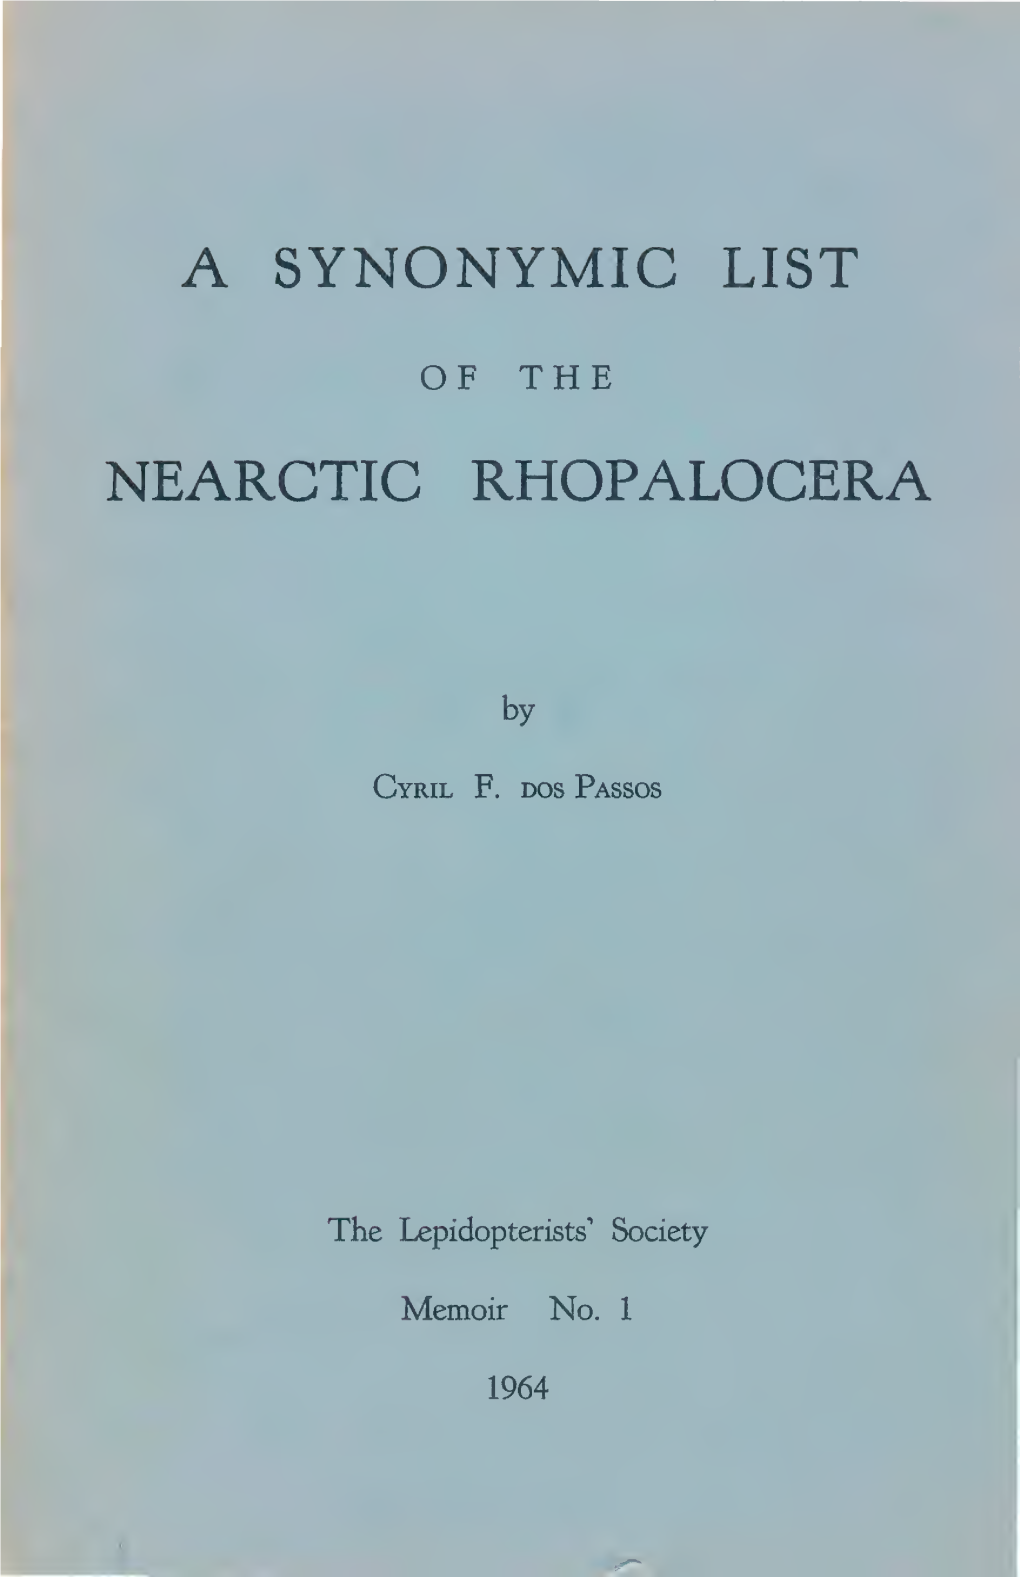 A Synonymic List of the Nearctic Rhopalocera